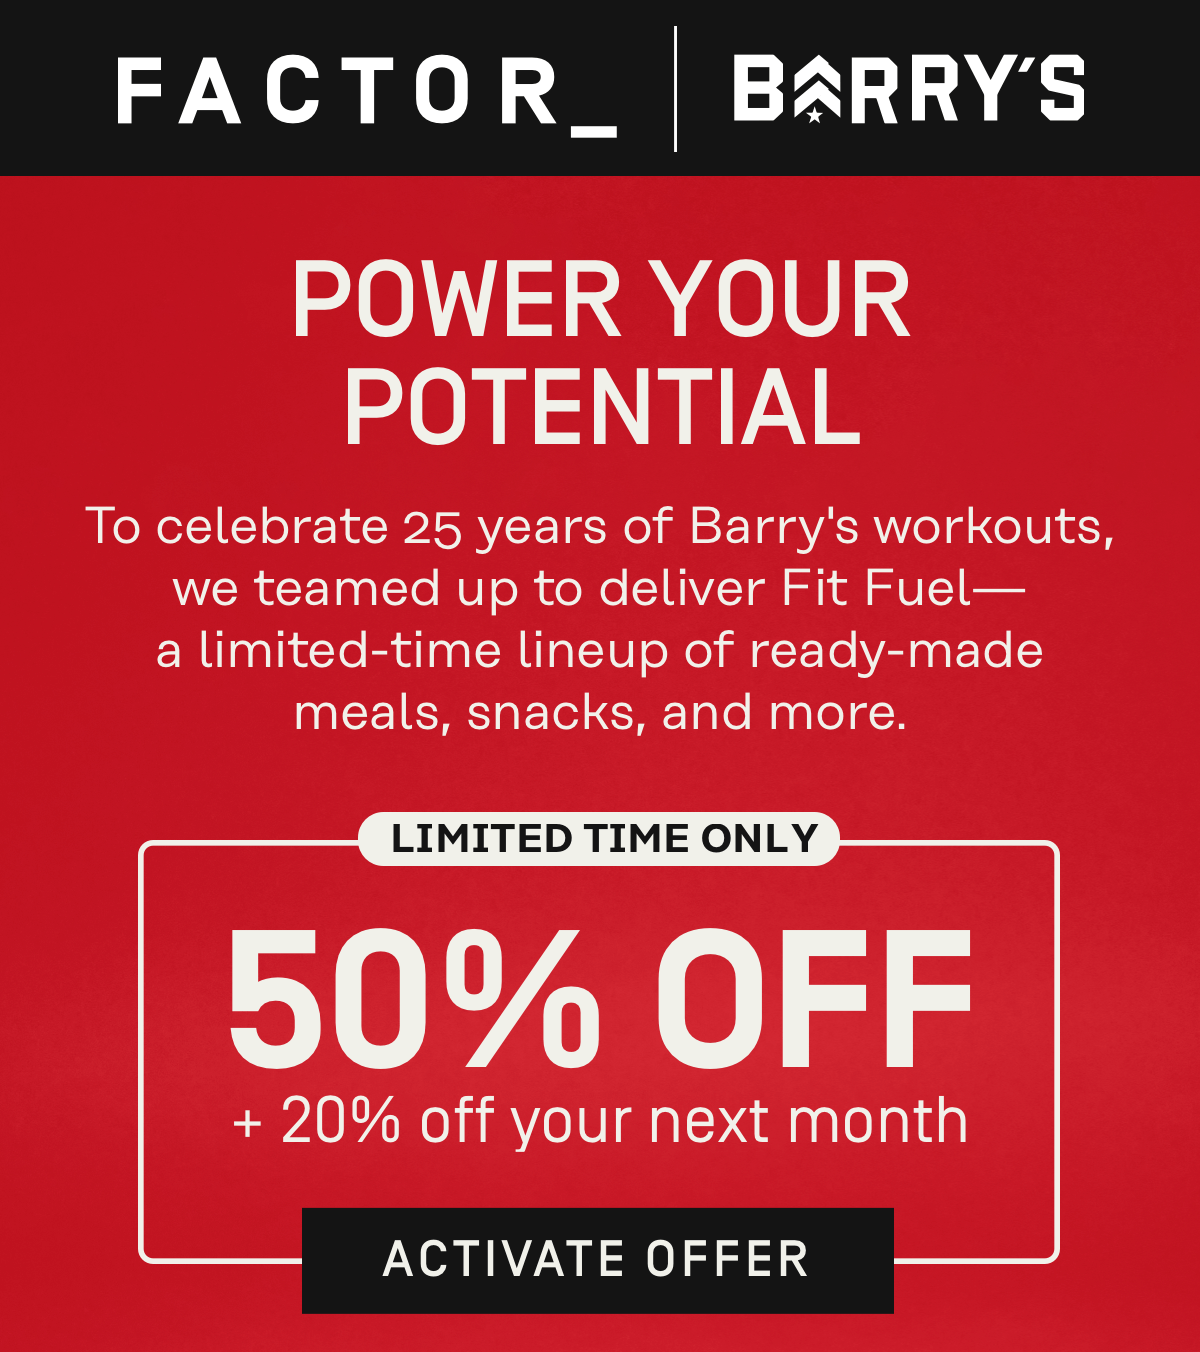 Factor x Barry's - Power your potential! To celebrate 25 years of Barry's workouts, we teamed up to deliver Fit Fuel -- a limited-time lineup of ready-made meals, snacks, and more 50% OFF + 20% Off your next month | Activate Offer